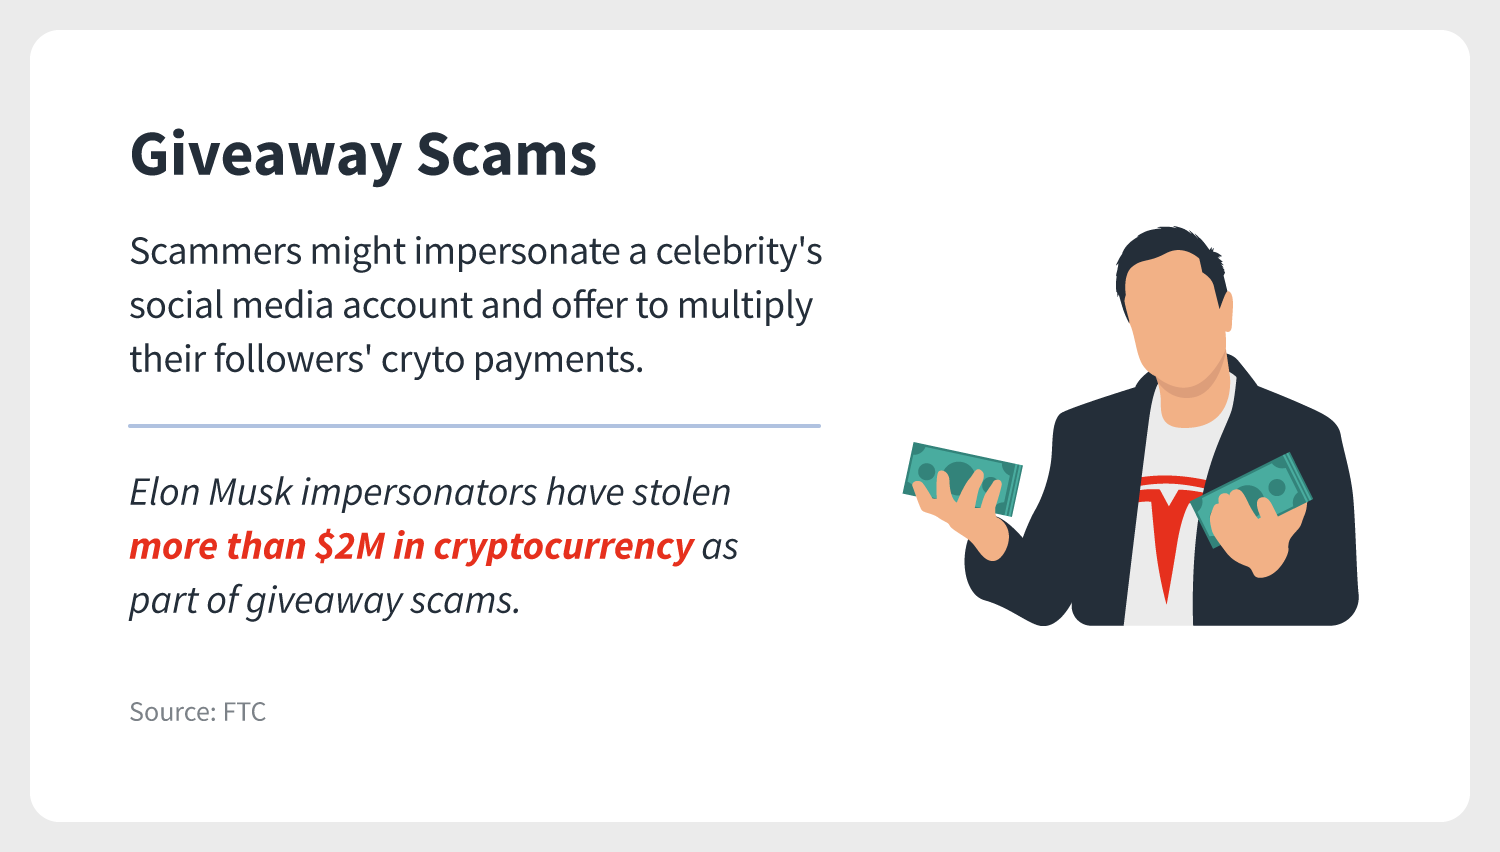 an explanation of giveaway cryptocurrency scams also includes an anecdote about Elon Musk impersonators stealing more than $2 million in cryptocurrency